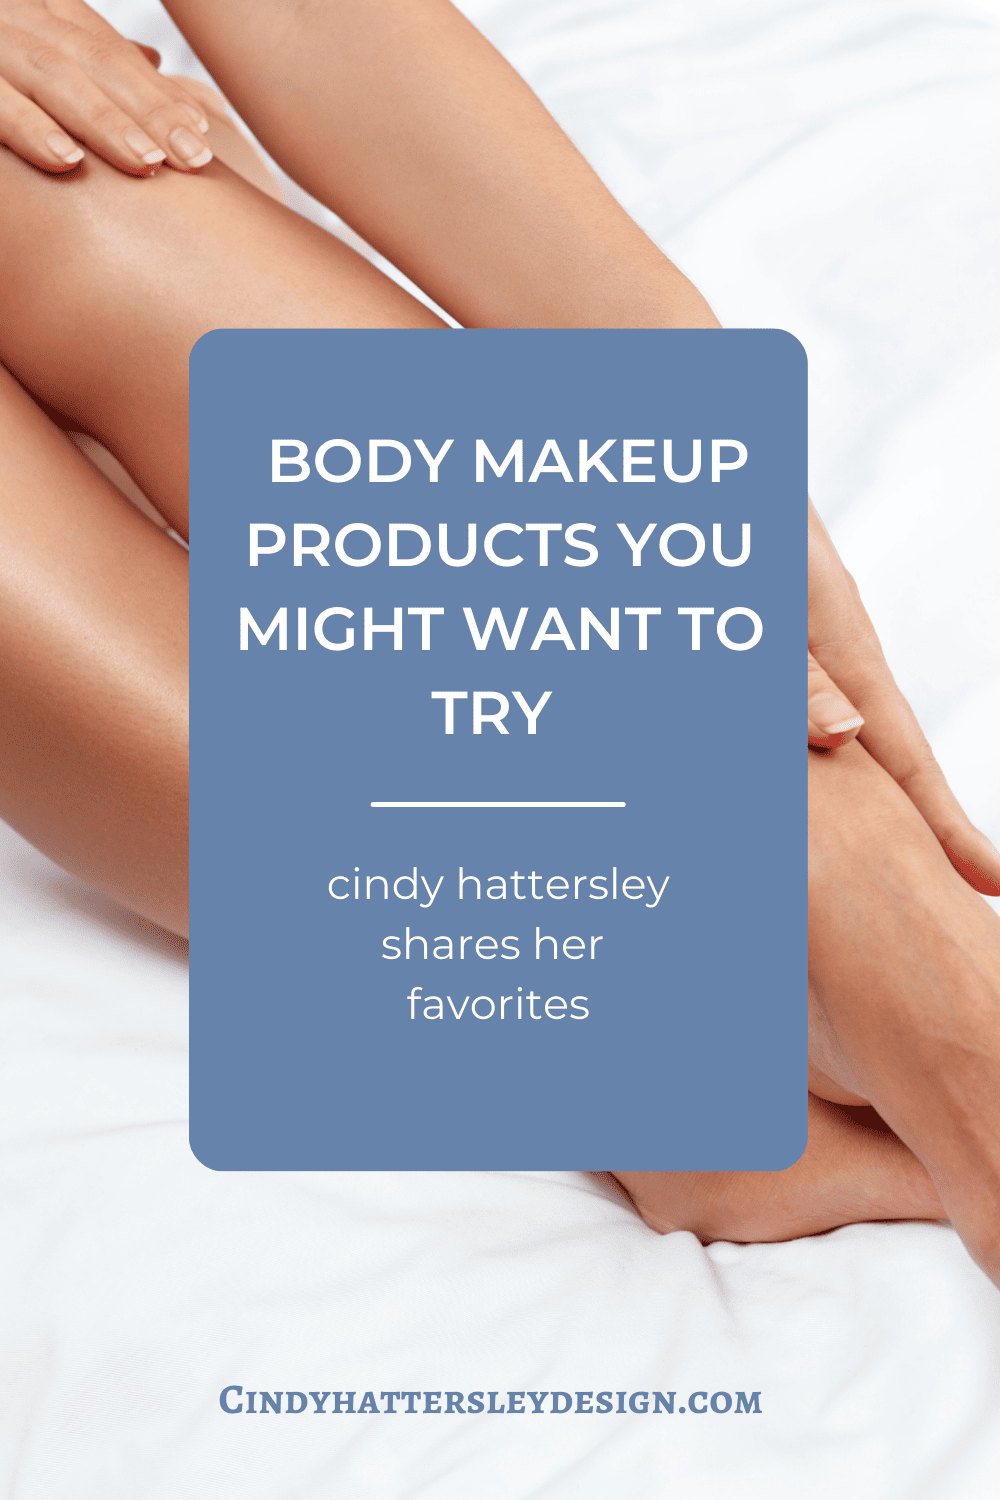 The Best Body Makeup for Women Over 50 - Cindy Hattersley Design